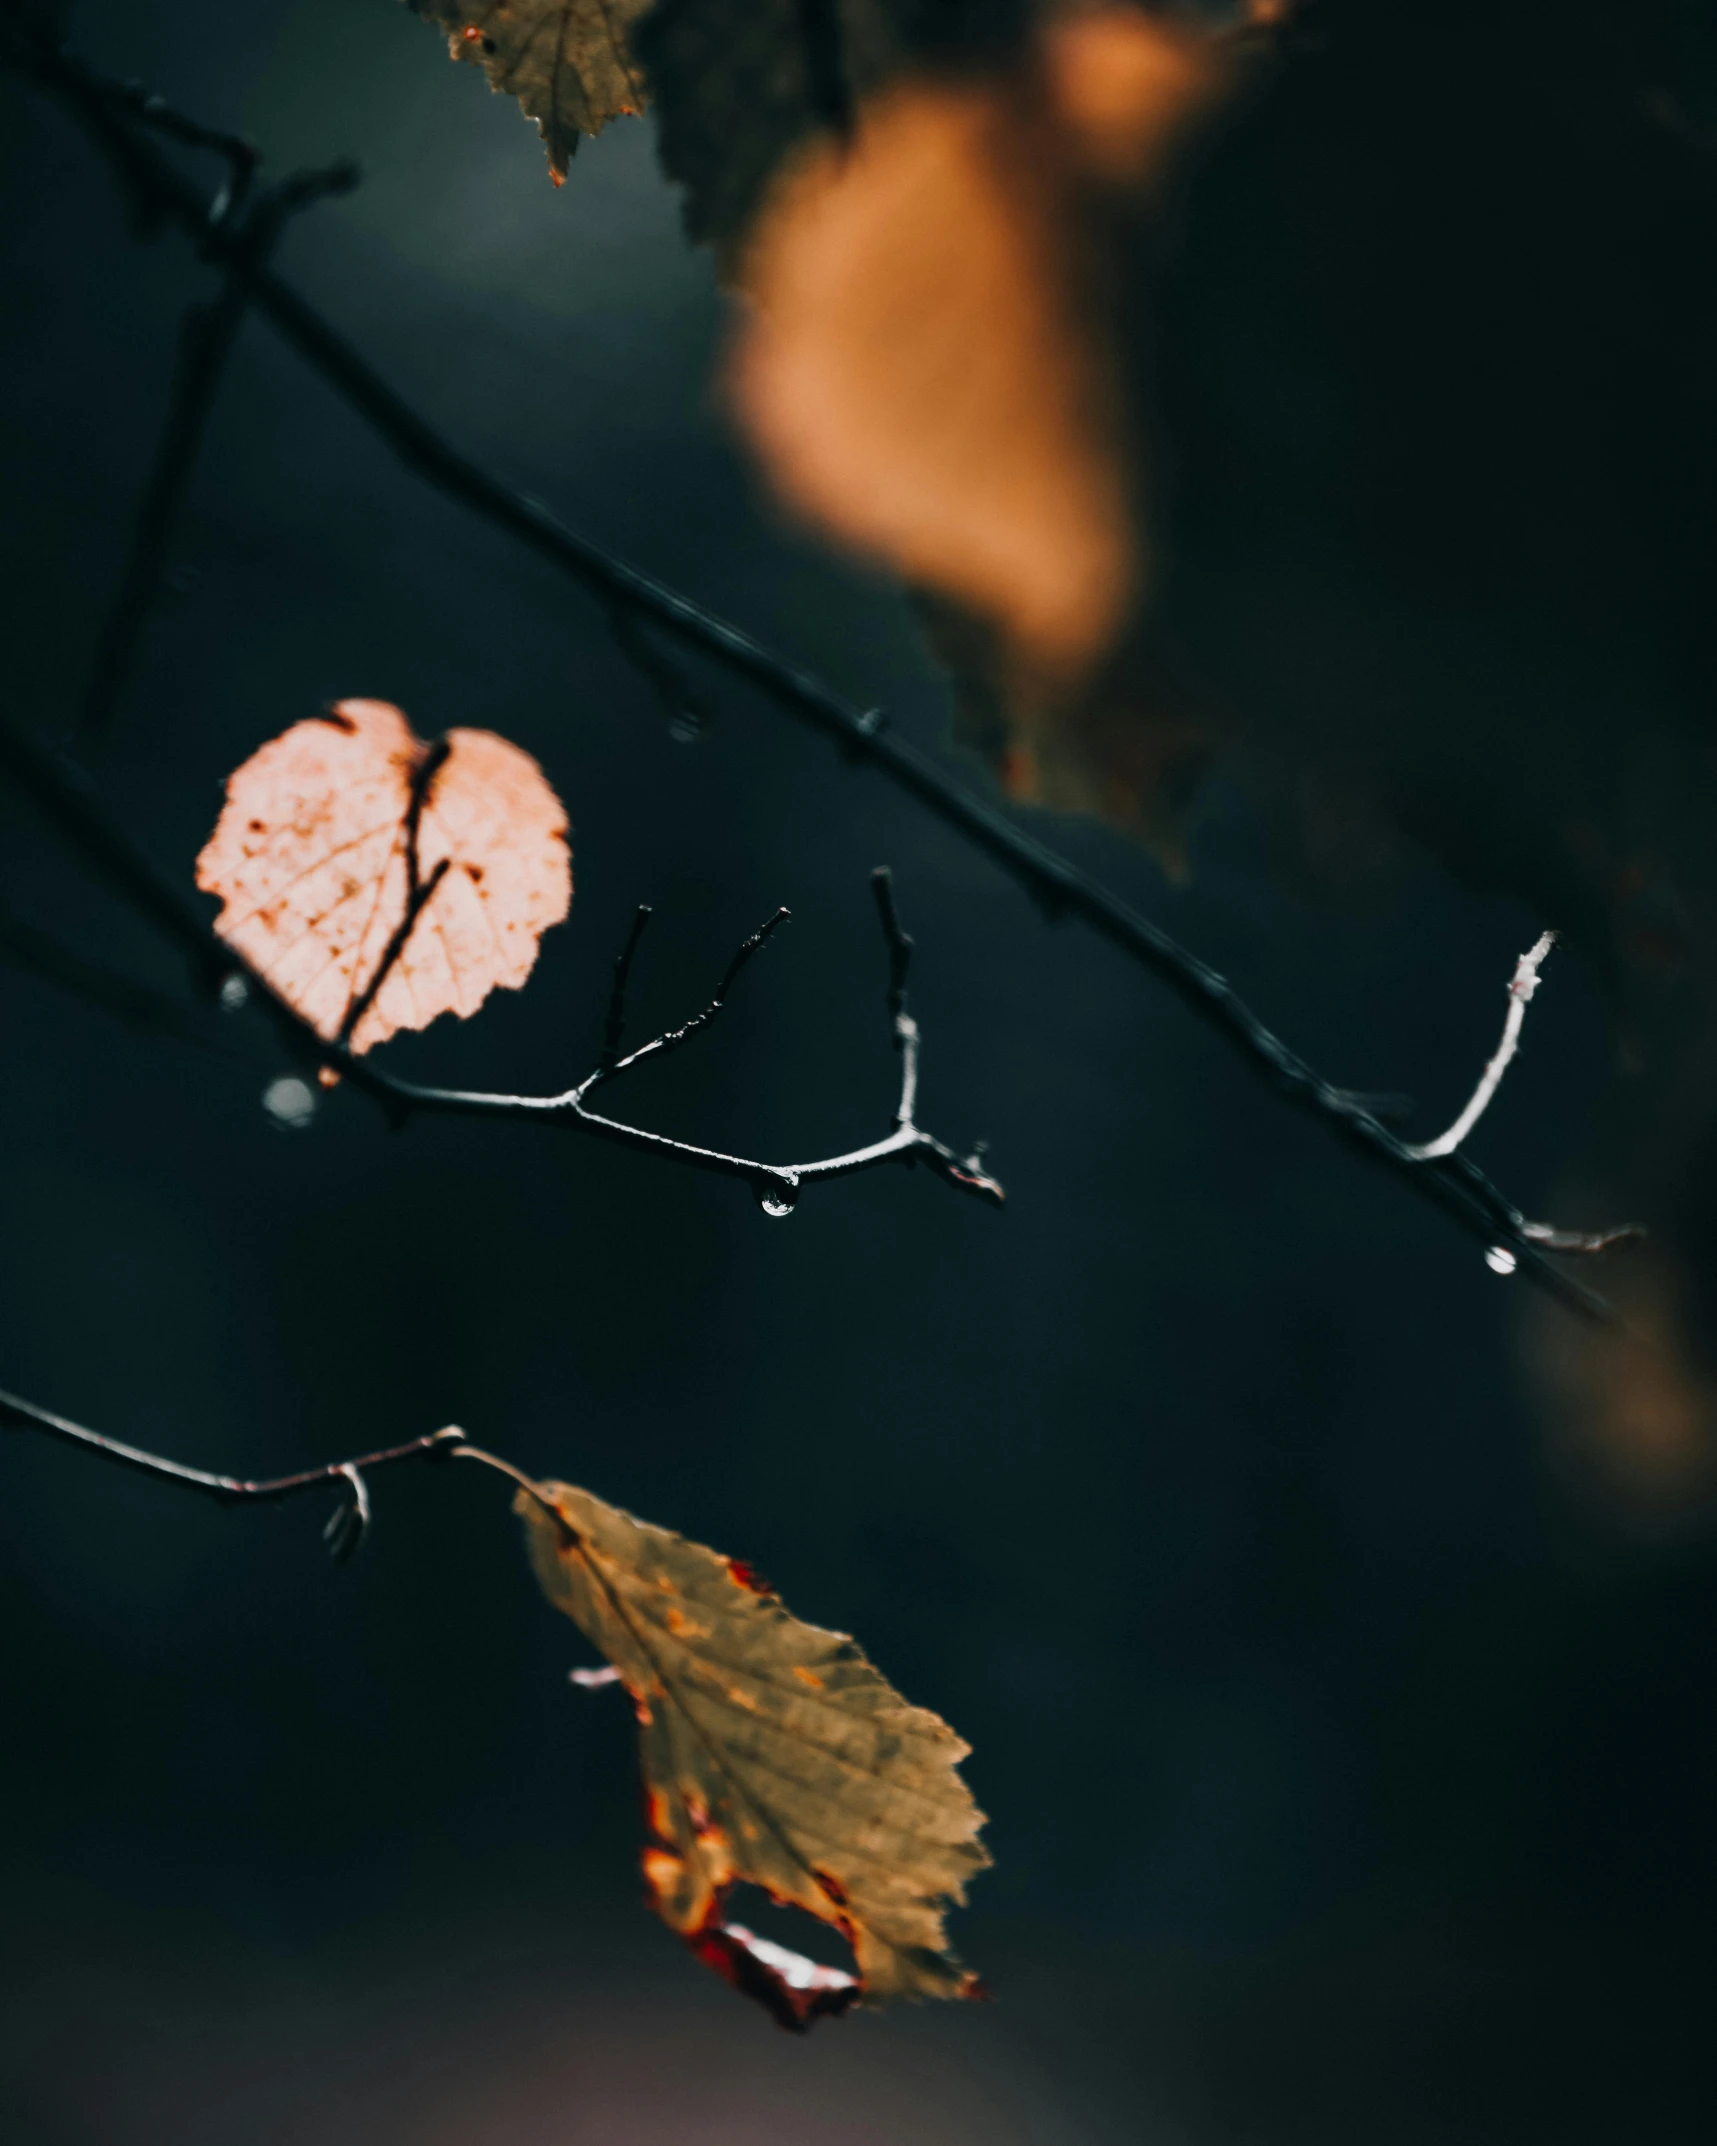 a close up of a leaf on a tree branch, by Elsa Bleda, trending on pexels, aestheticism, falling hearts, dark. no text, nordic forest colors, trap made of leaves